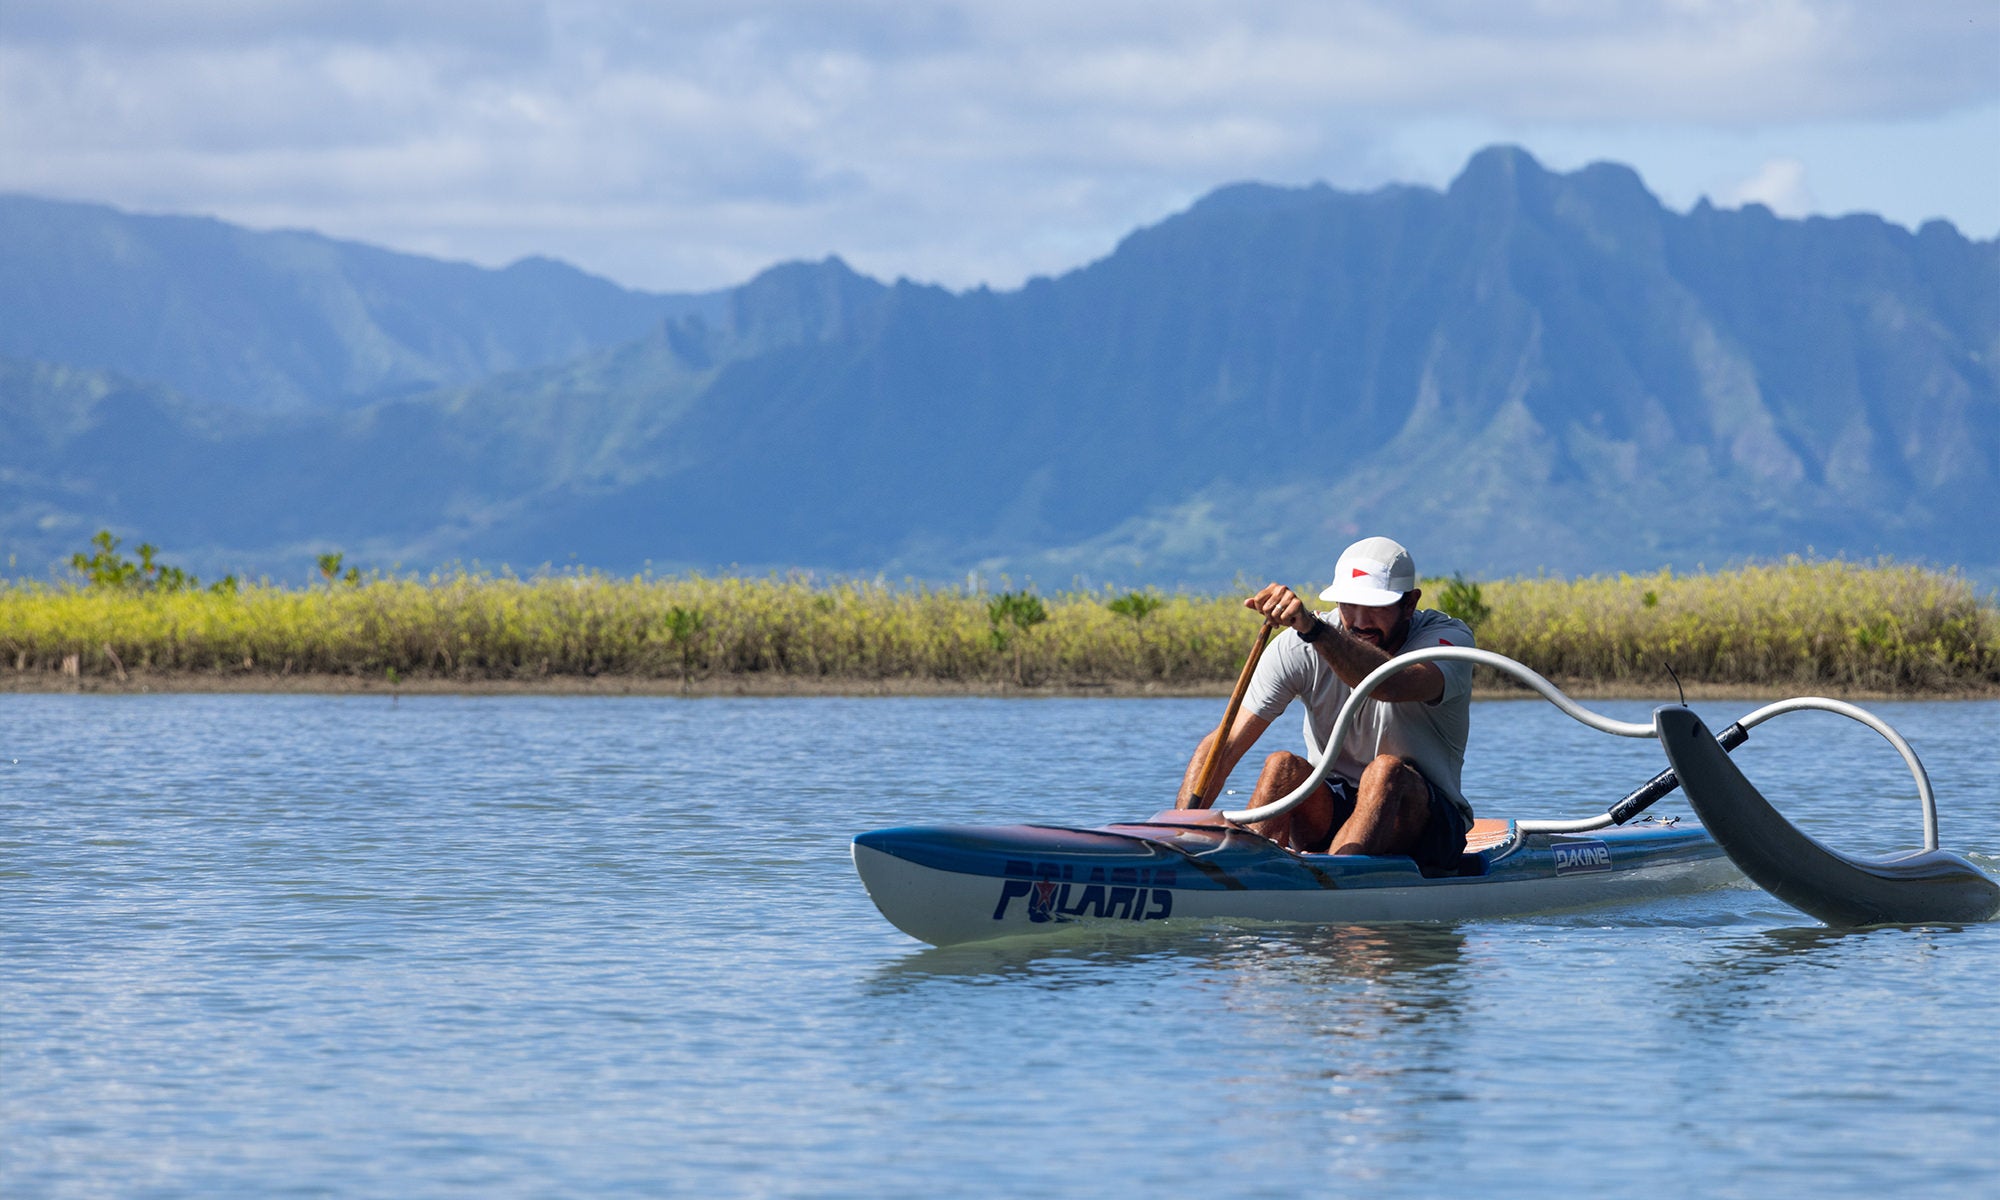 Kirk Ziegler paddling in an outrigger canoe in Hawaii